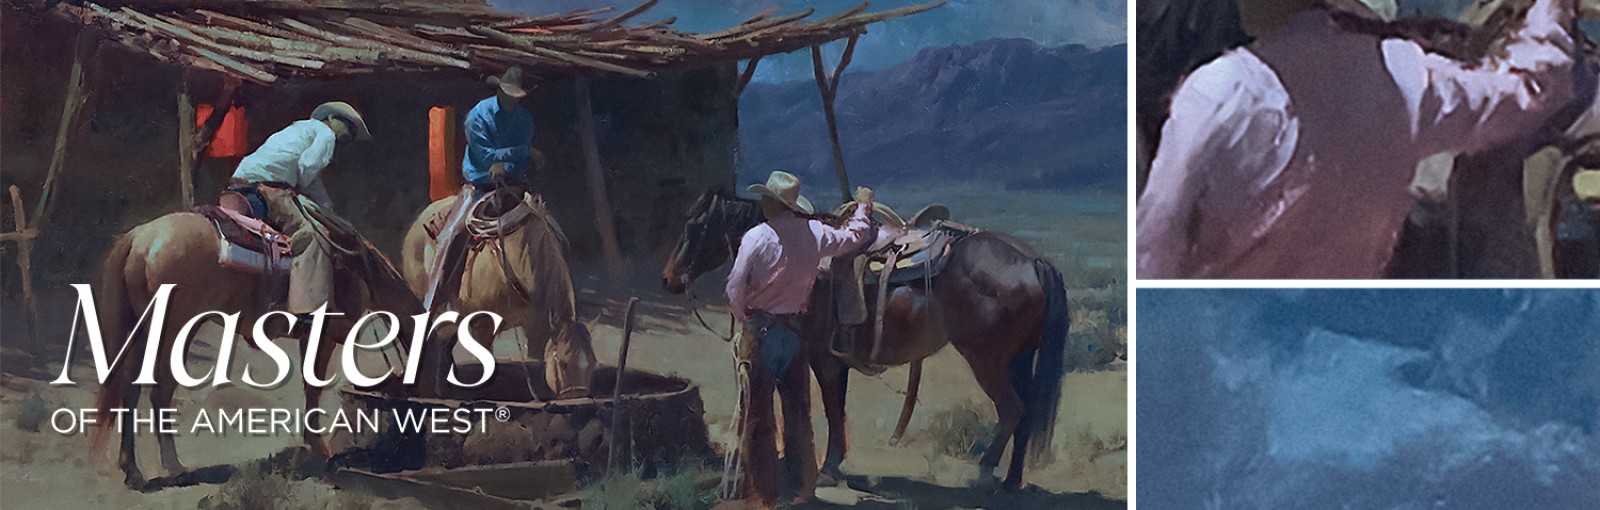 MASTERS OF THE AMERICAN WEST® 2021 Autry Museum of the American West